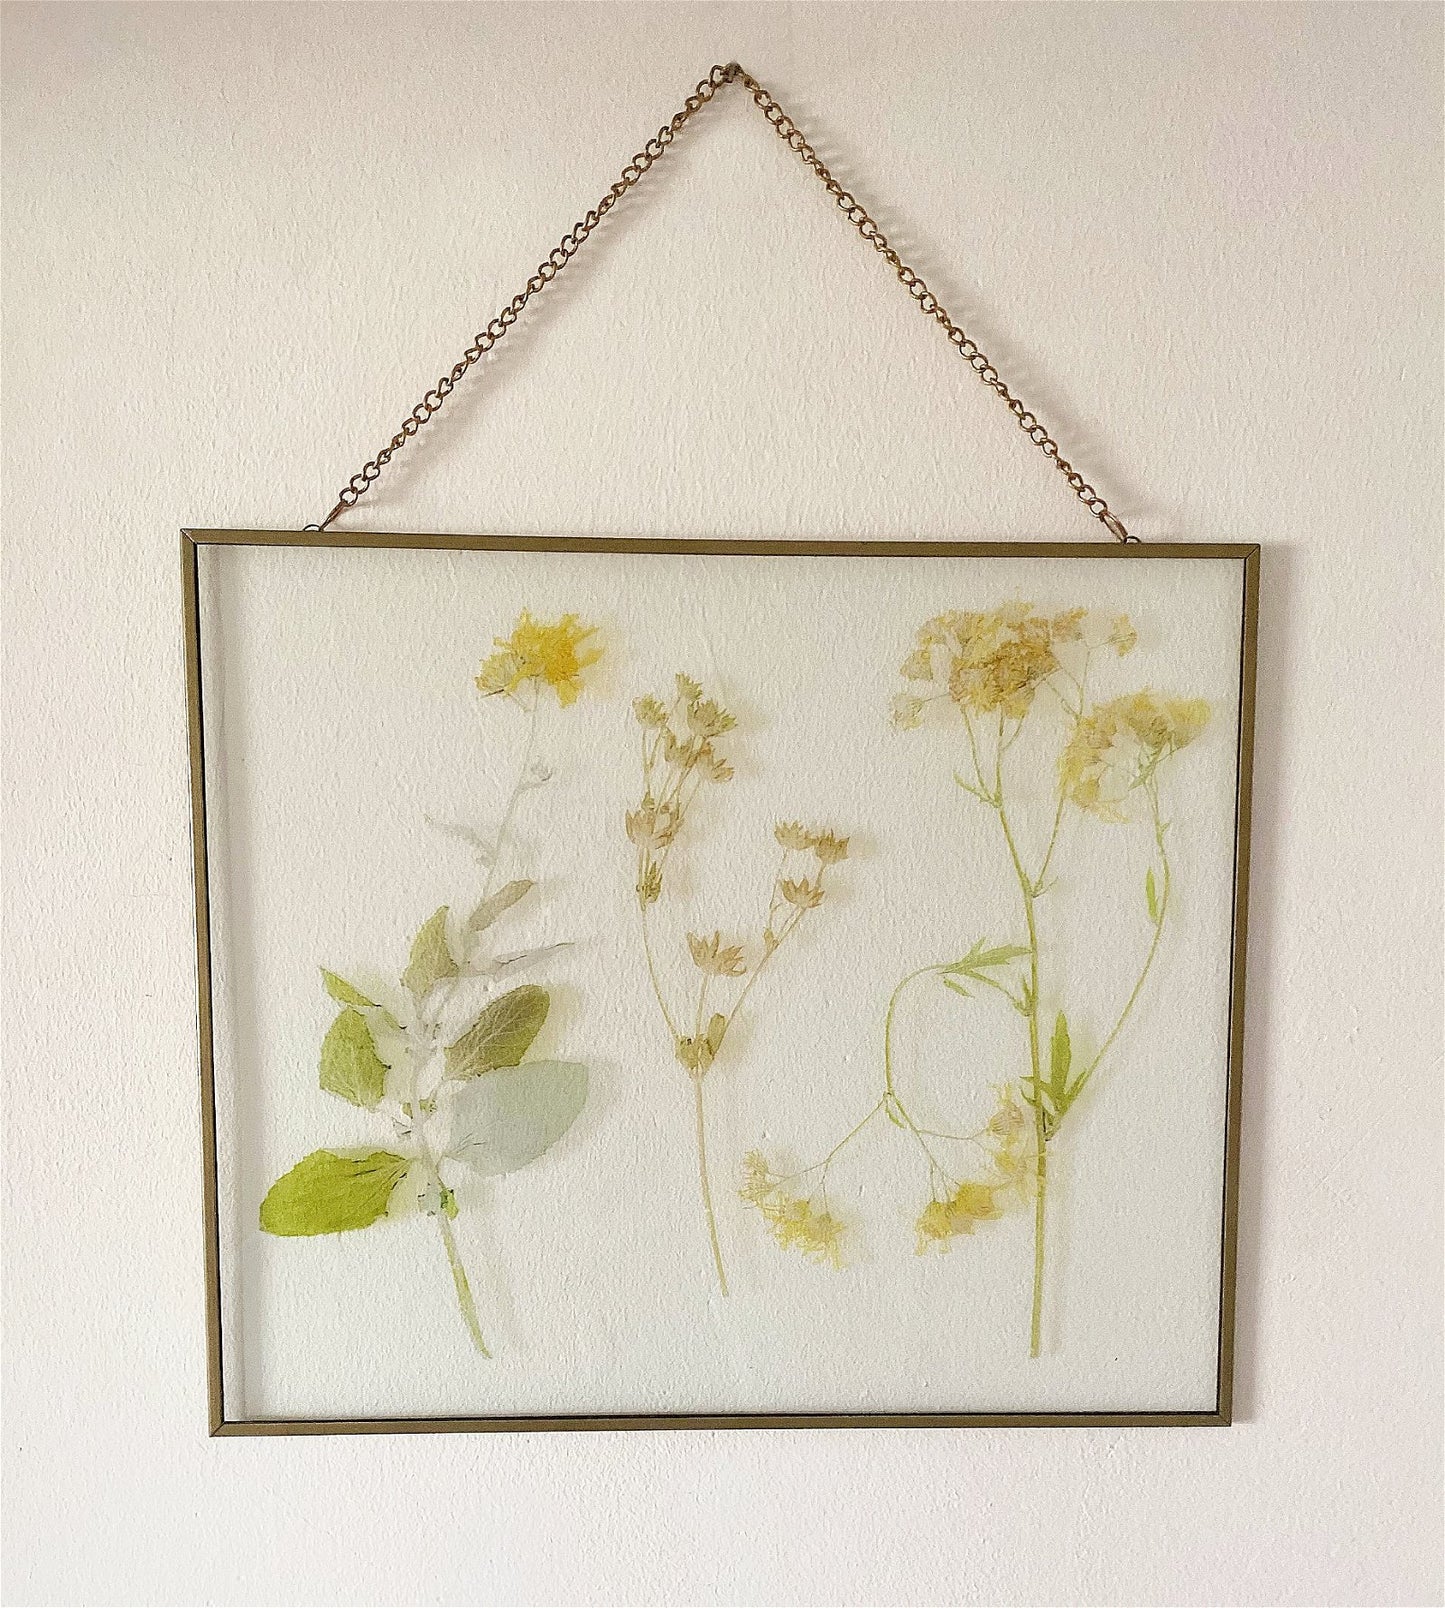 Les Fleurs Flower Wall Hanging Picture